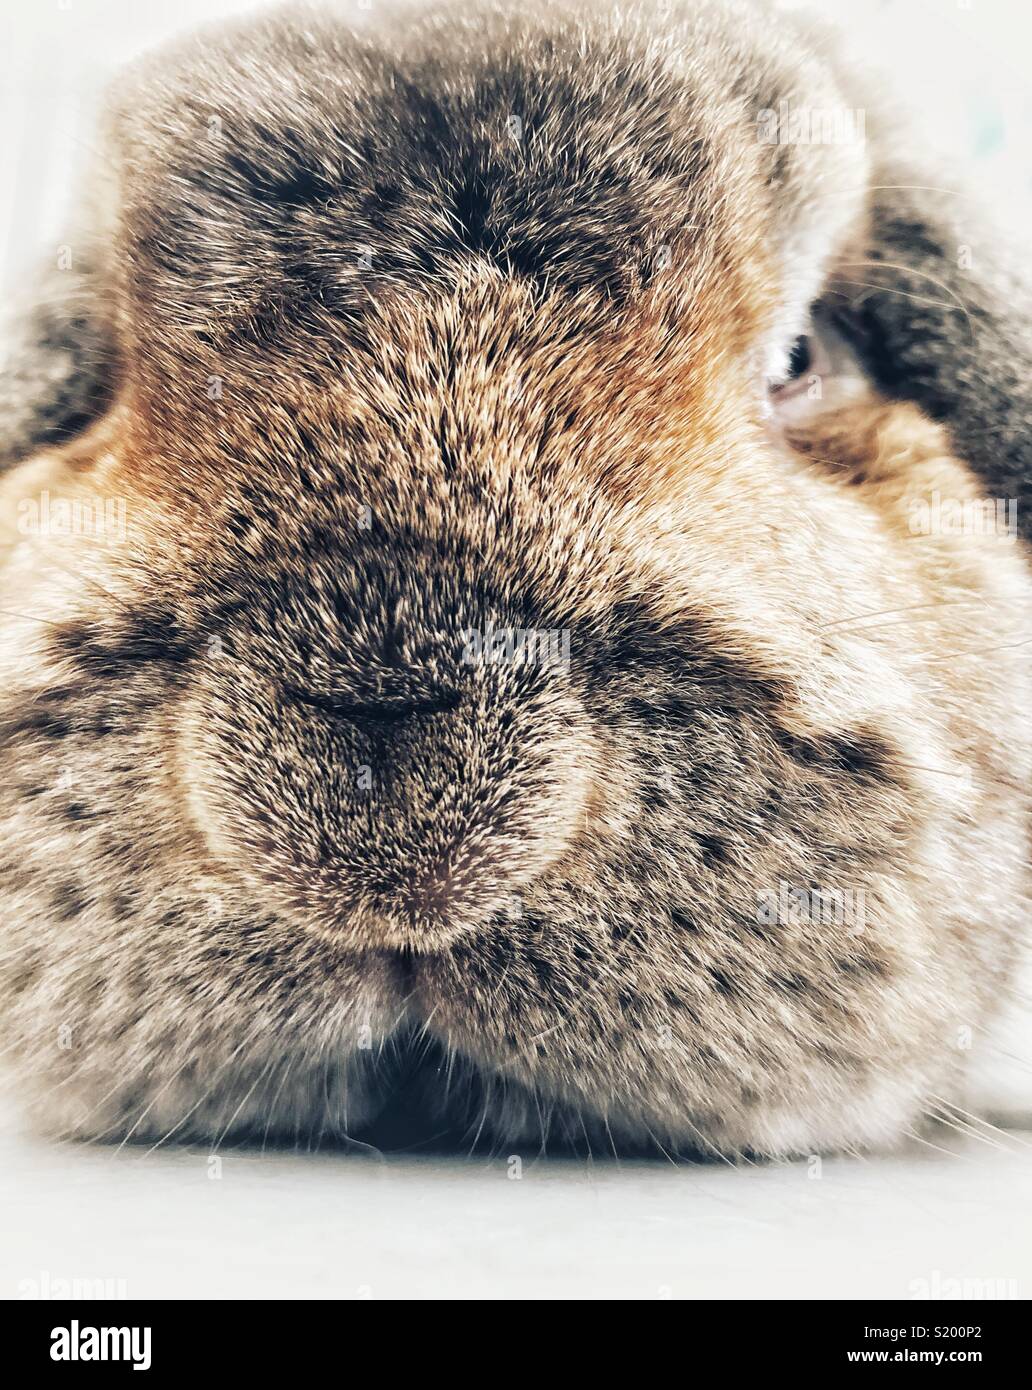 Brown and grey French Lop bunny rabbit closeup face portrait Stock Photo